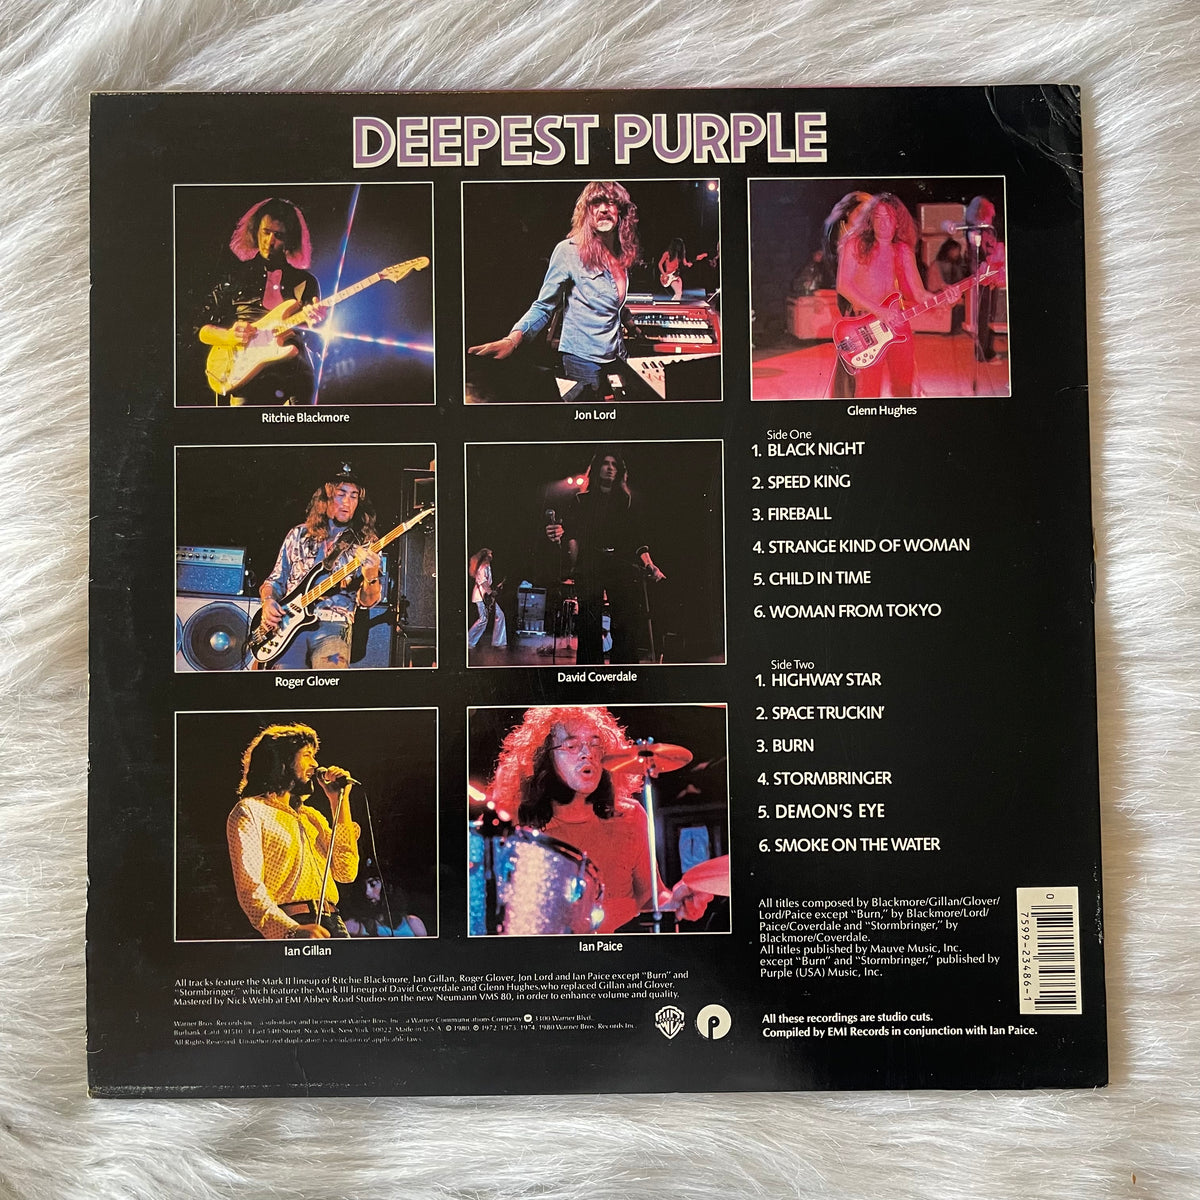 The Very Best of Deep Purple CD Collection Album Deepest Purple Genre Hard  Rock Gifts Vintage Music English Rock Band 